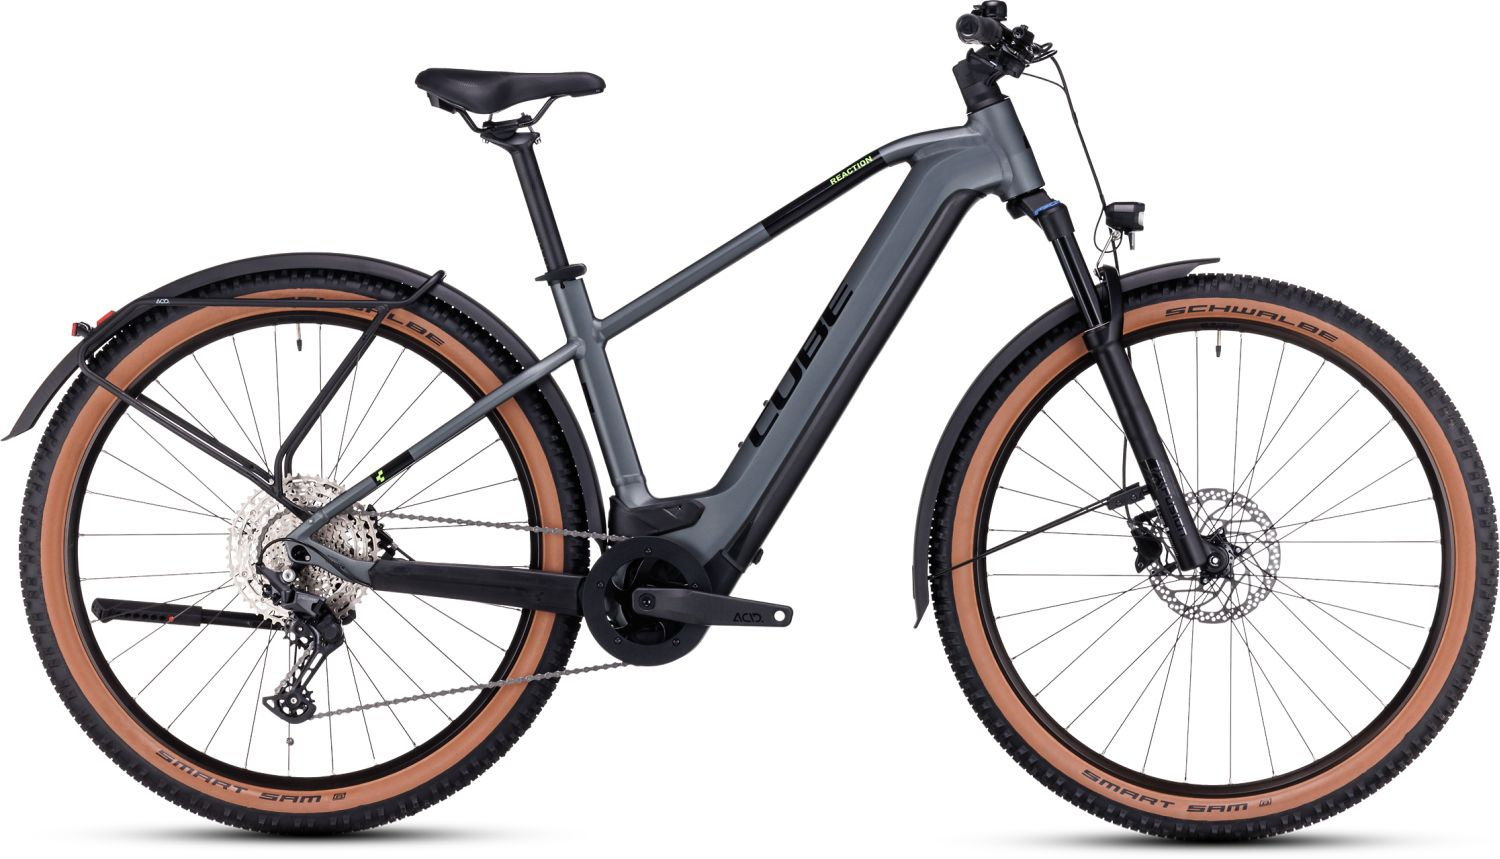 Buy Cube Bikes Cube Bikes For Sale Online Up to 35% Discount